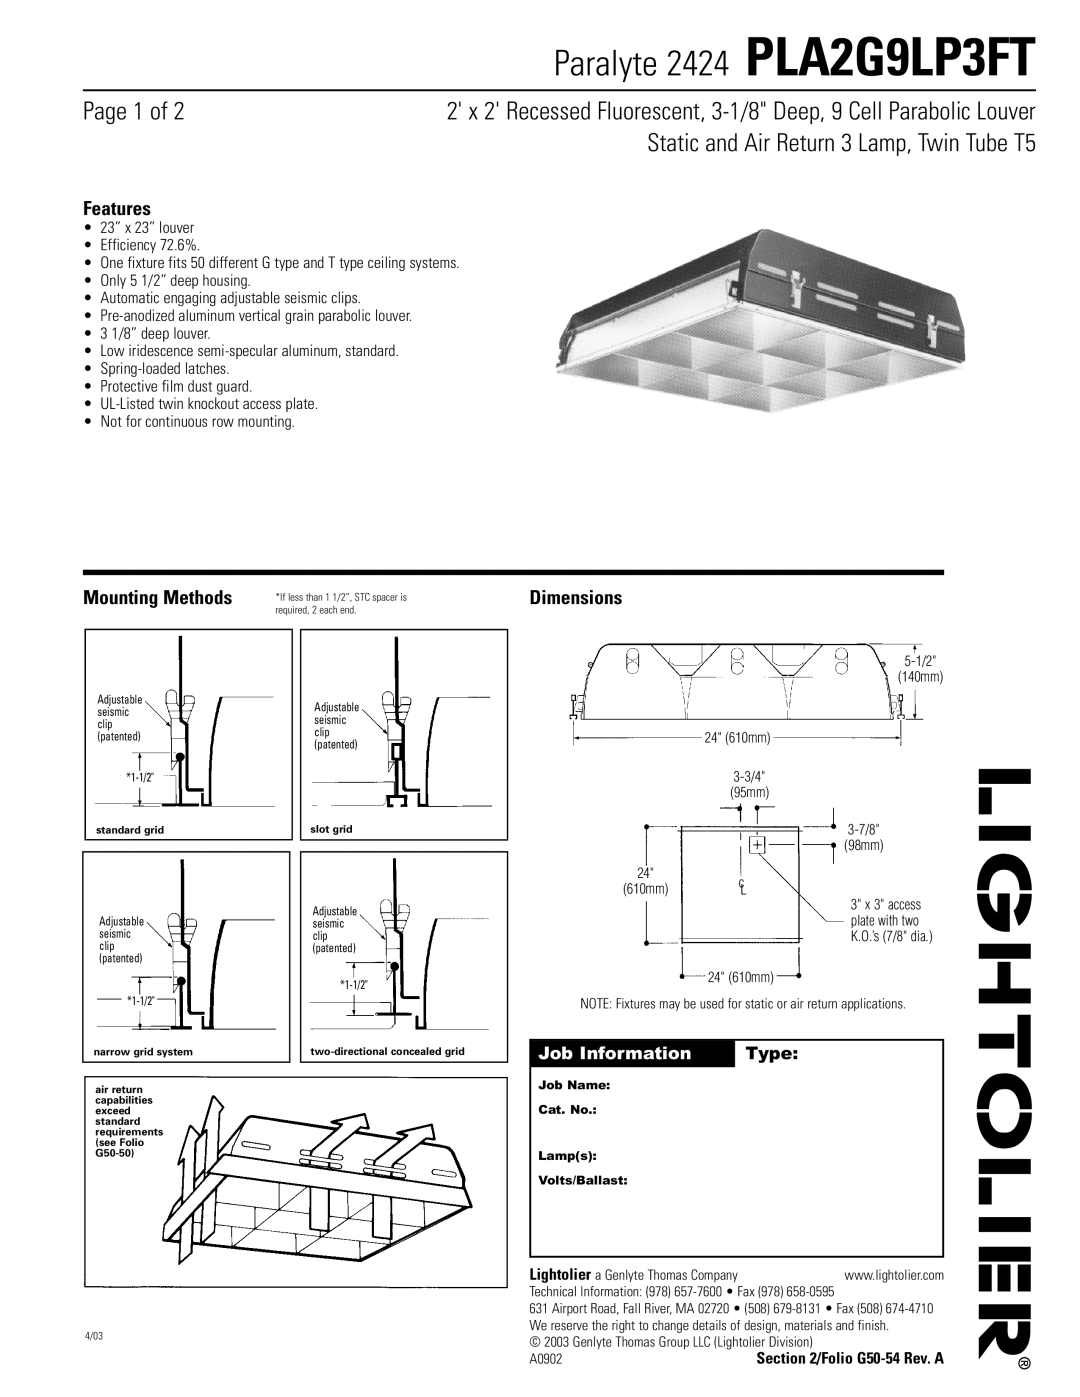 Lightolier dimensions Paralyte 2424 PLA2G9LP3FT, Page 1 of, Static and Air Return 3 Lamp, Twin Tube T5, Features, Type 